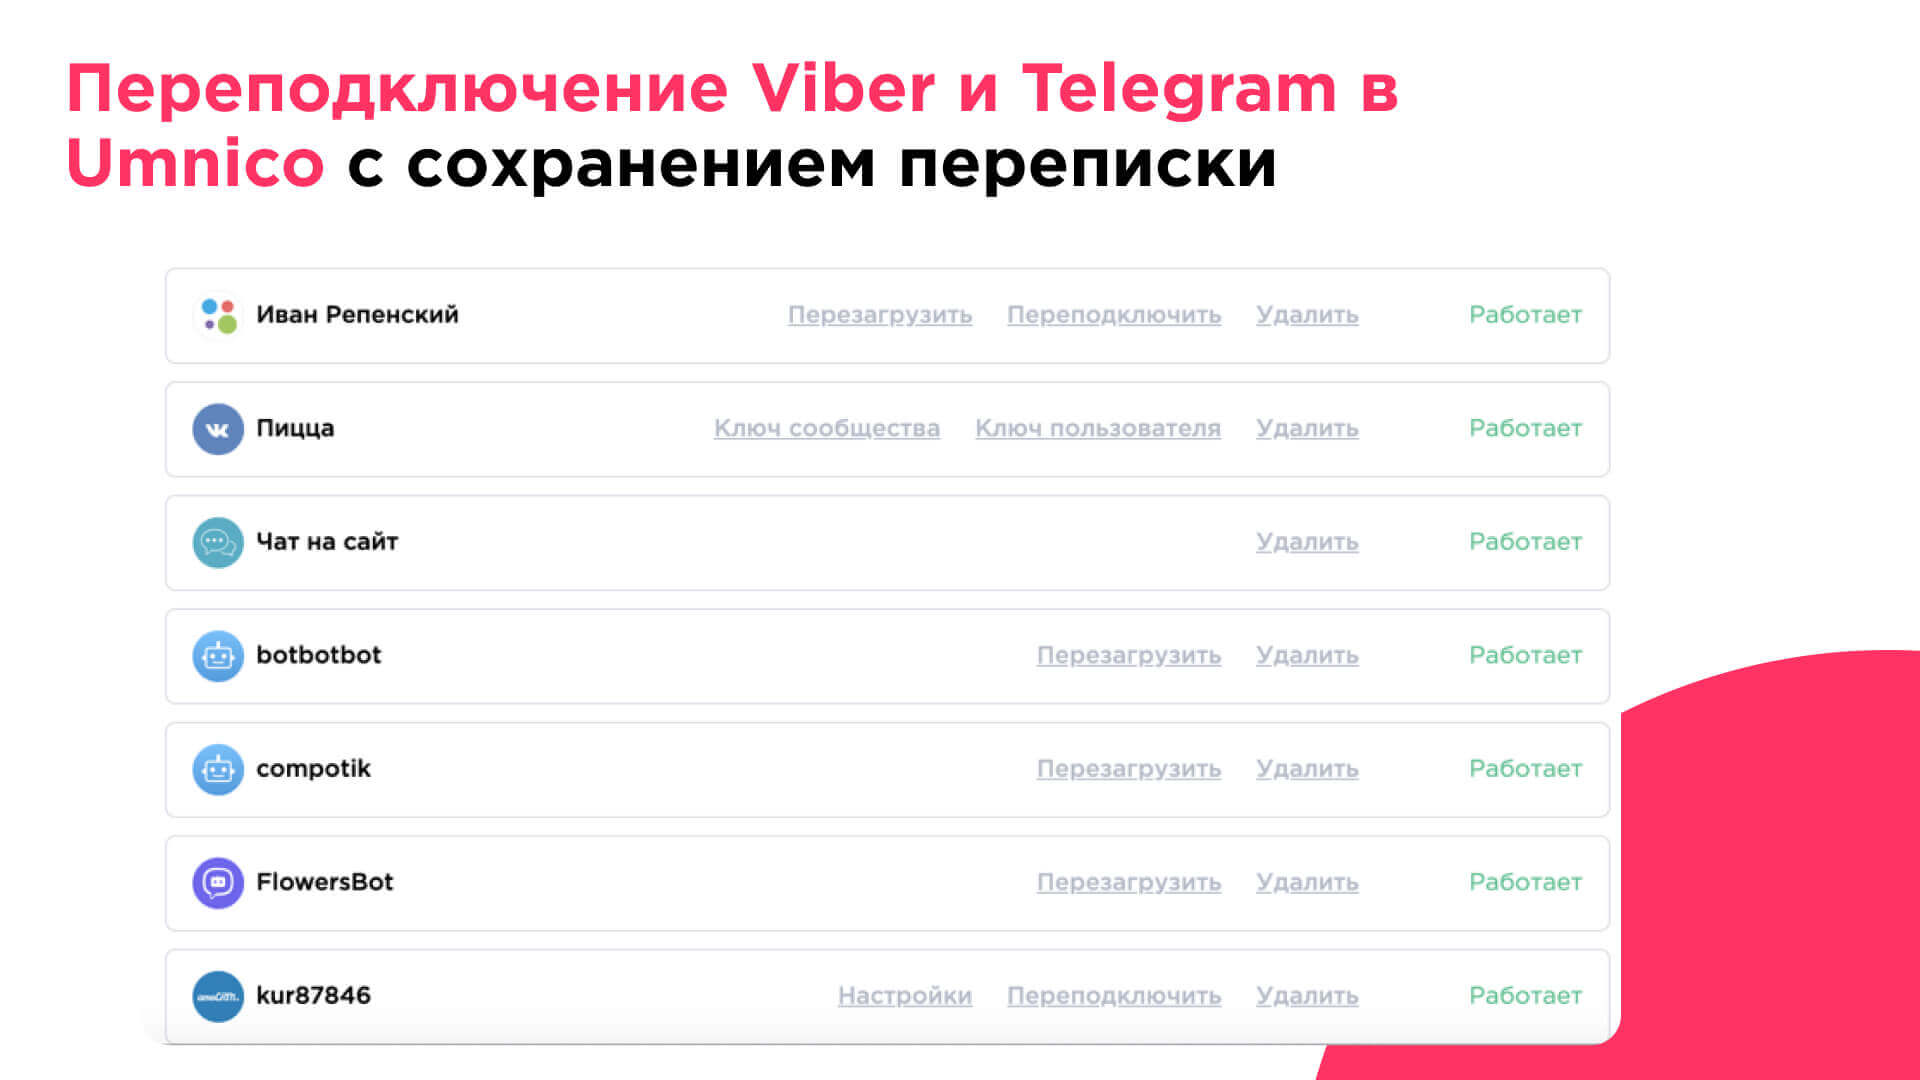 Viber and Telegram reconnection in Umnico with full history preservation